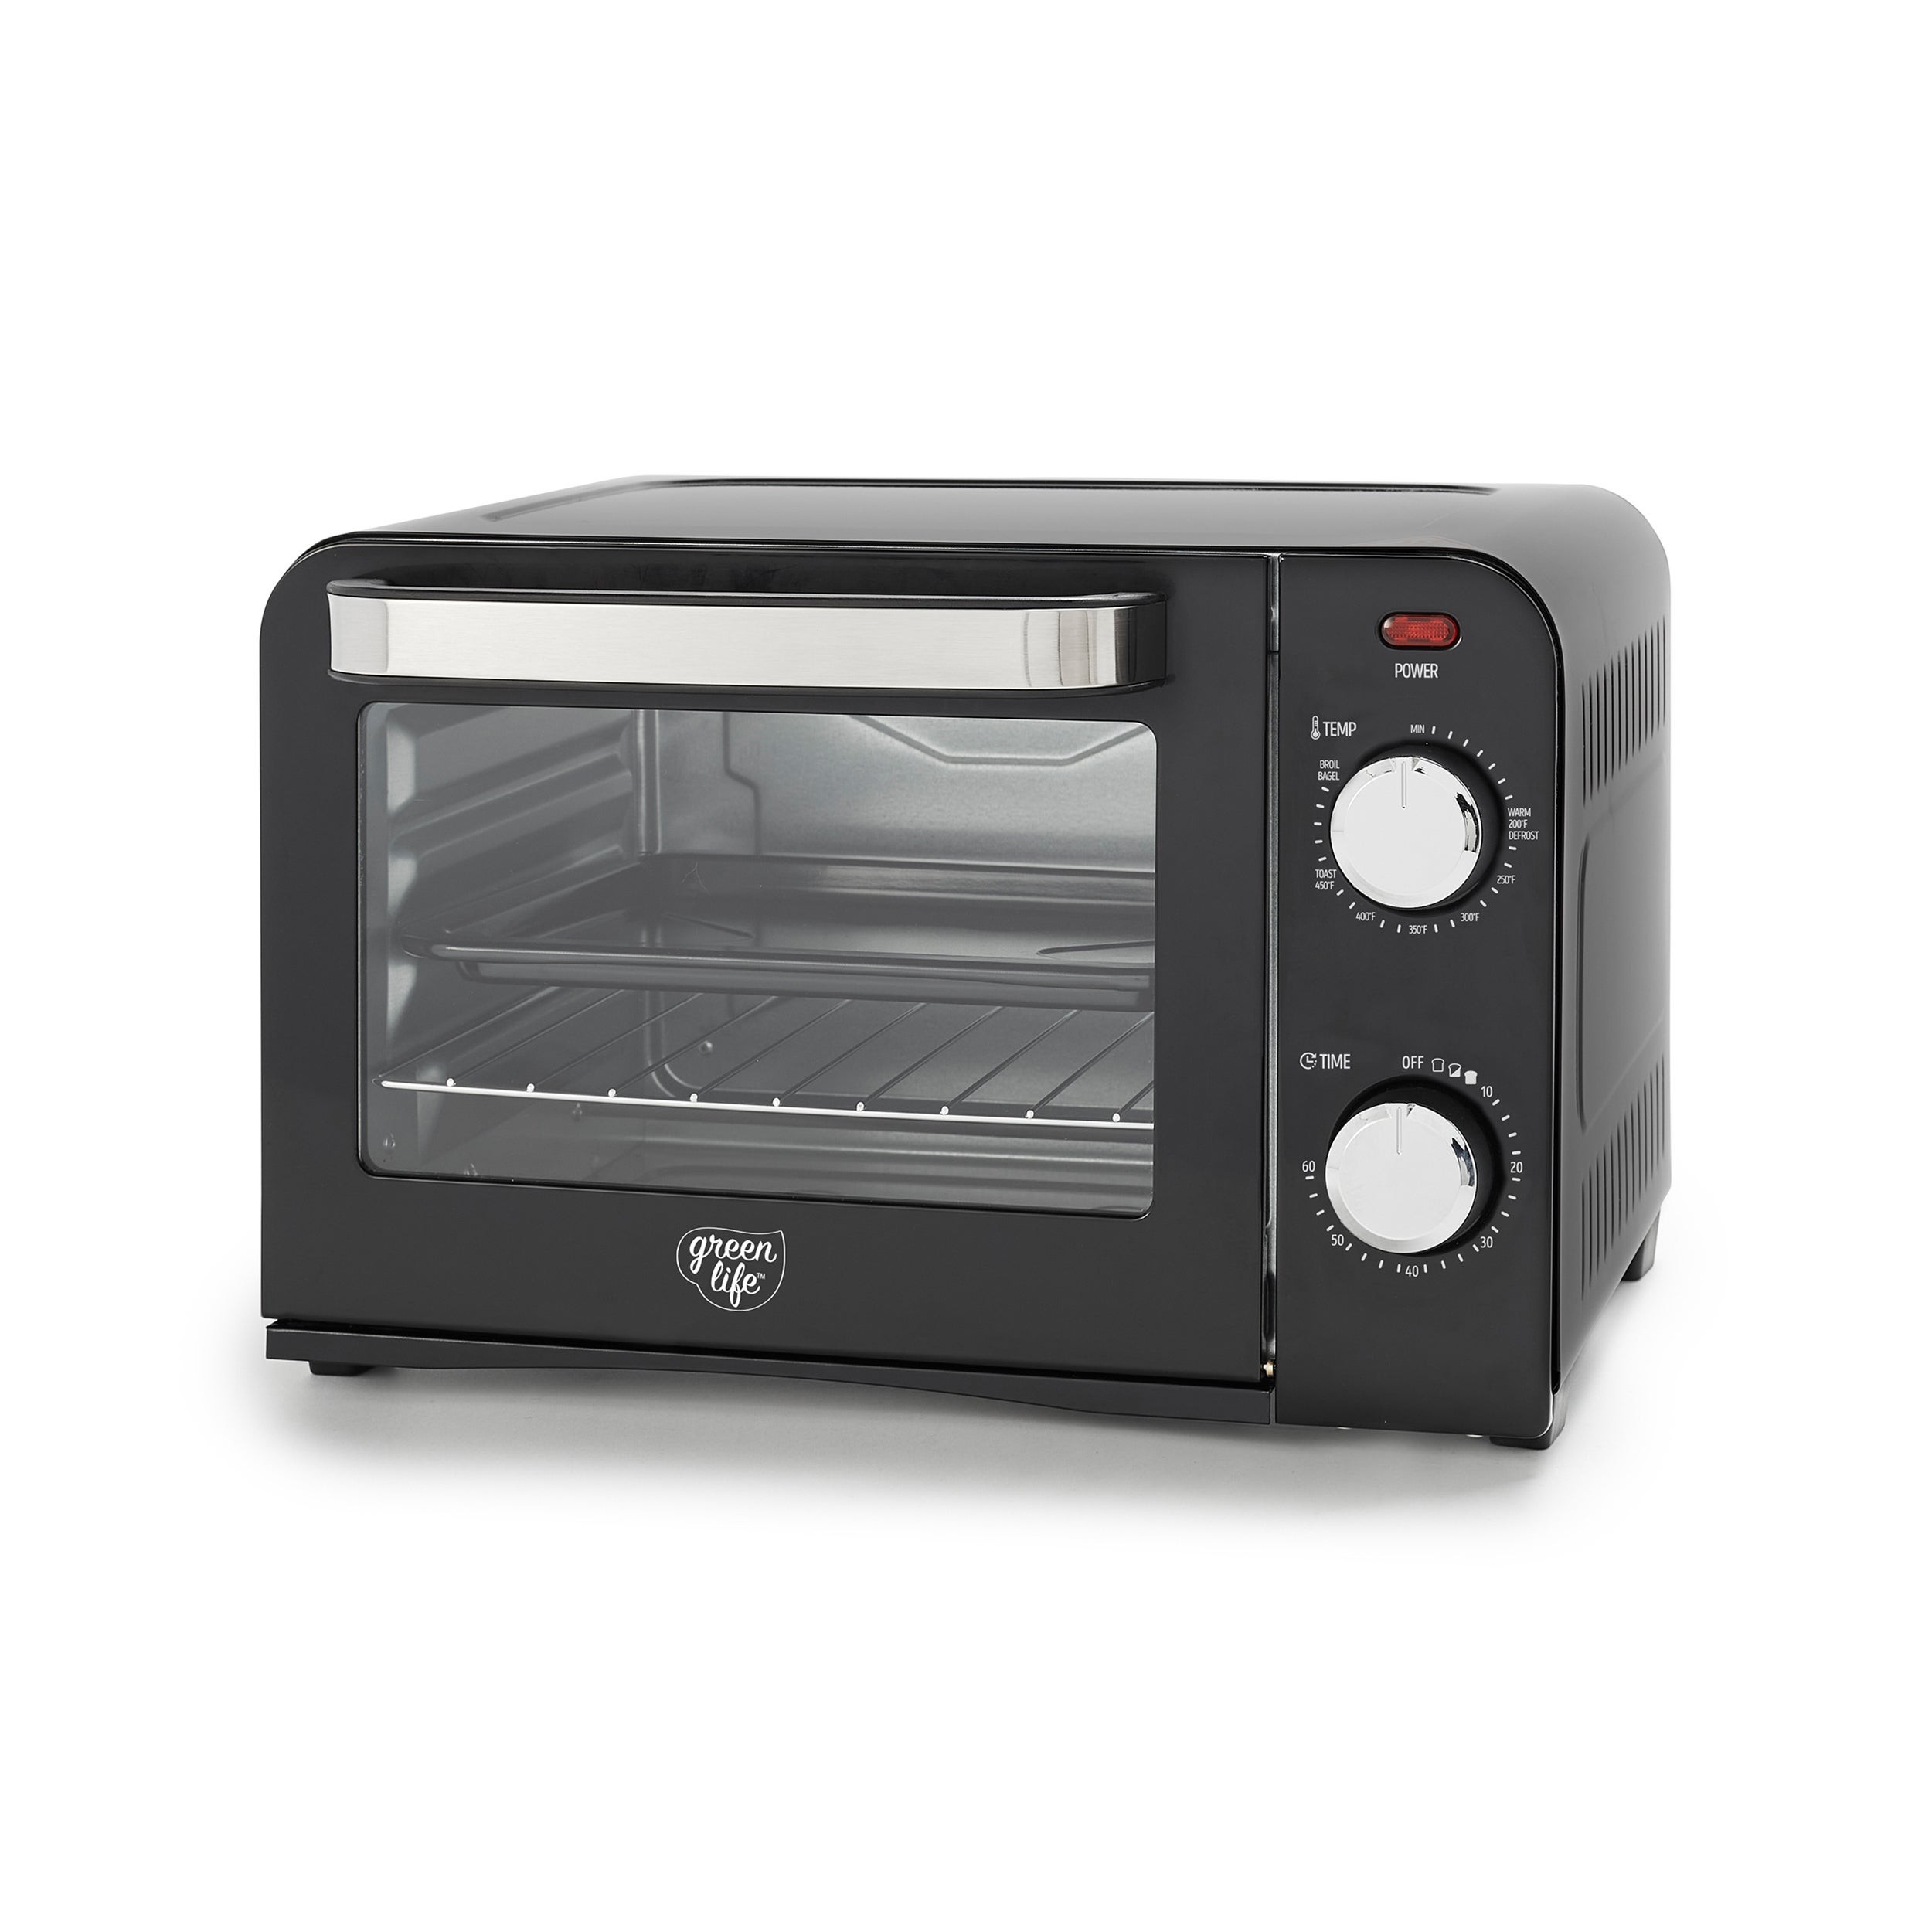 All-in-One Toaster Oven Black